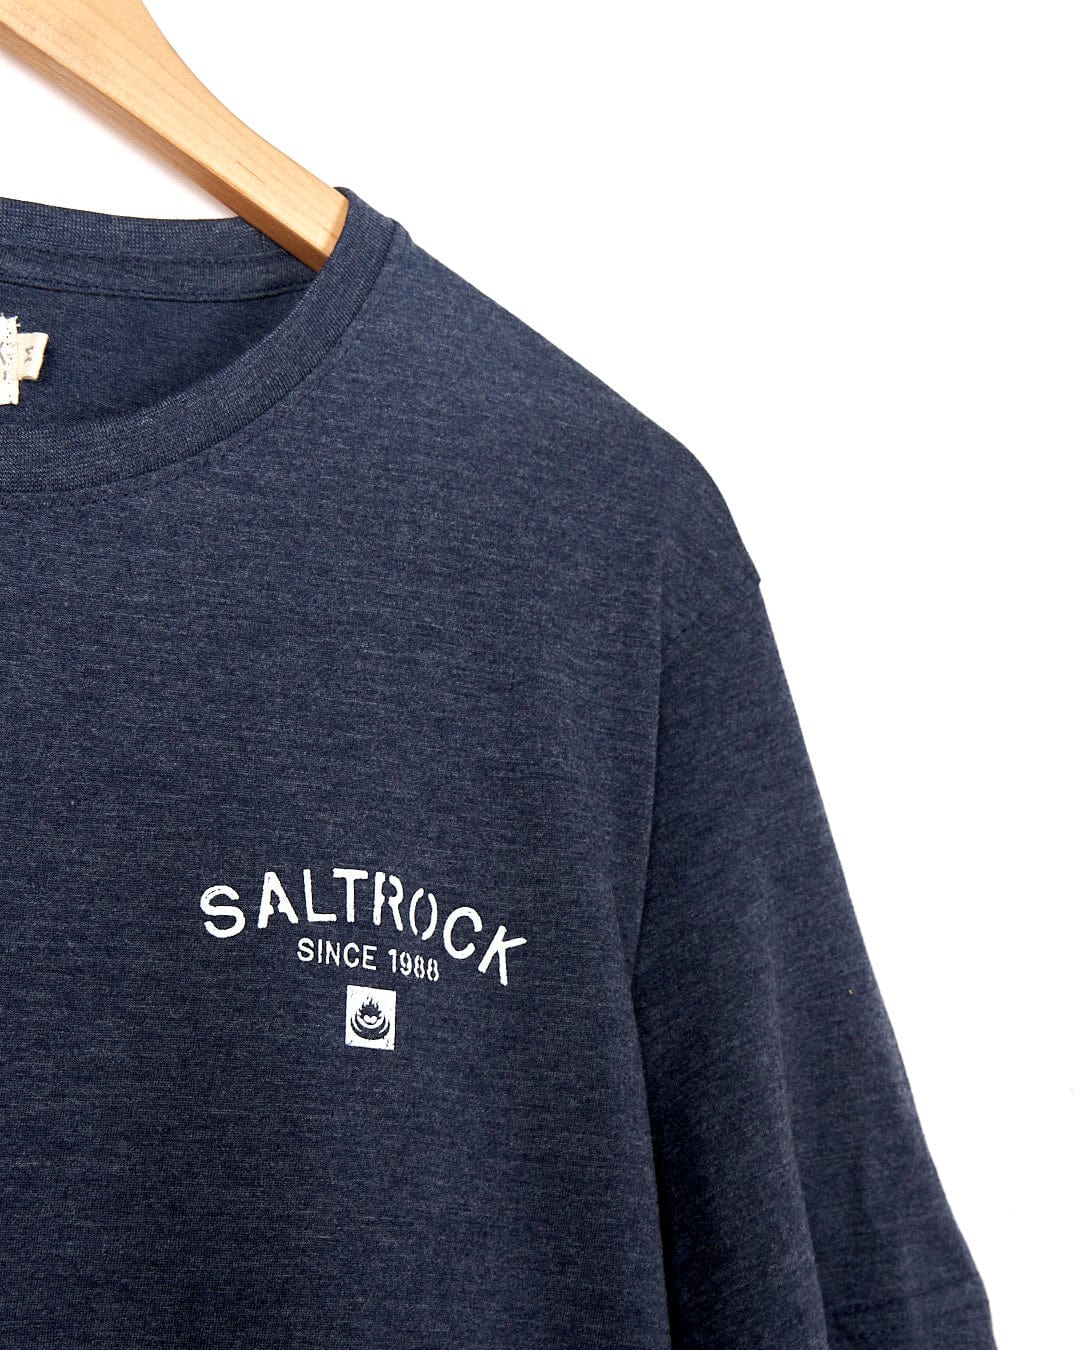 A Stencil - Location T-Shirt - Newquay - Blue with the word Saltrock on it.